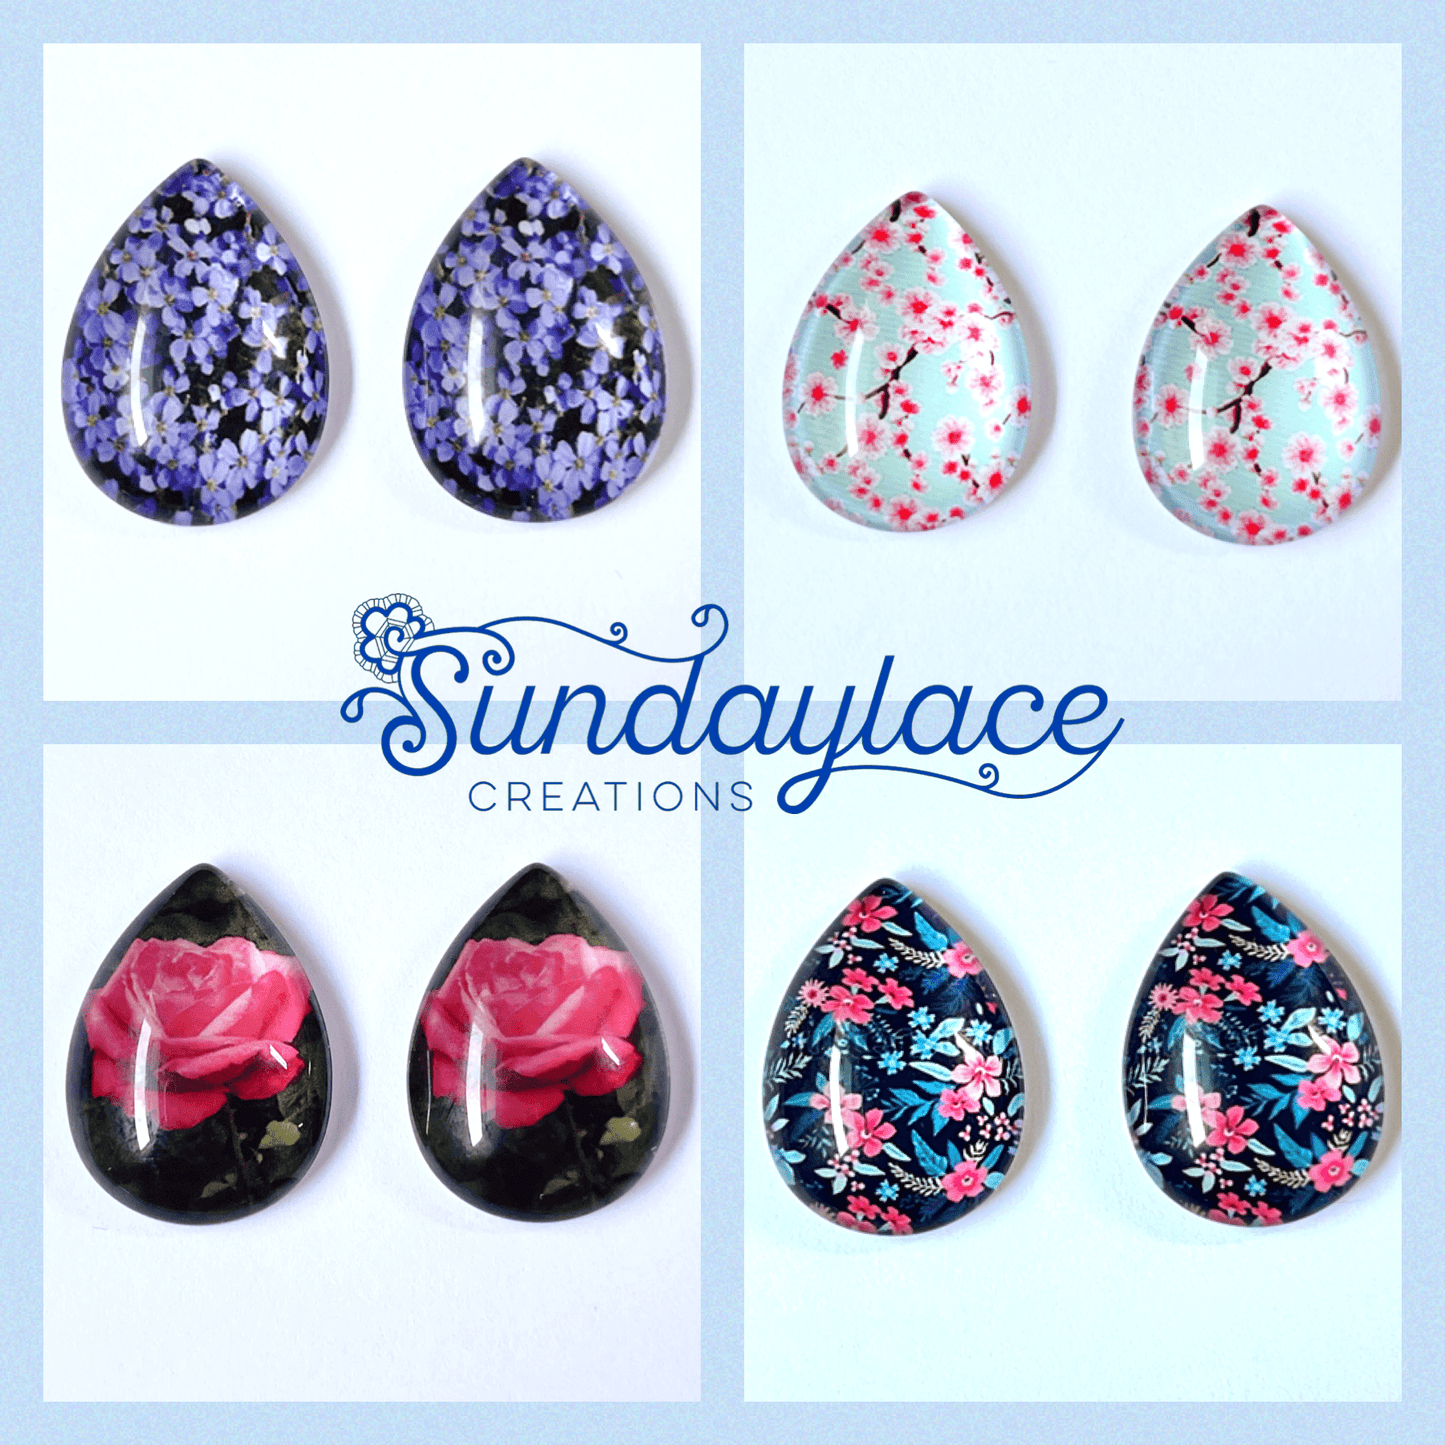 Sundaylace Creations & Bling Resin Gems 18*25mm Floral Teardrops, Acrylic Printed Resin Gems